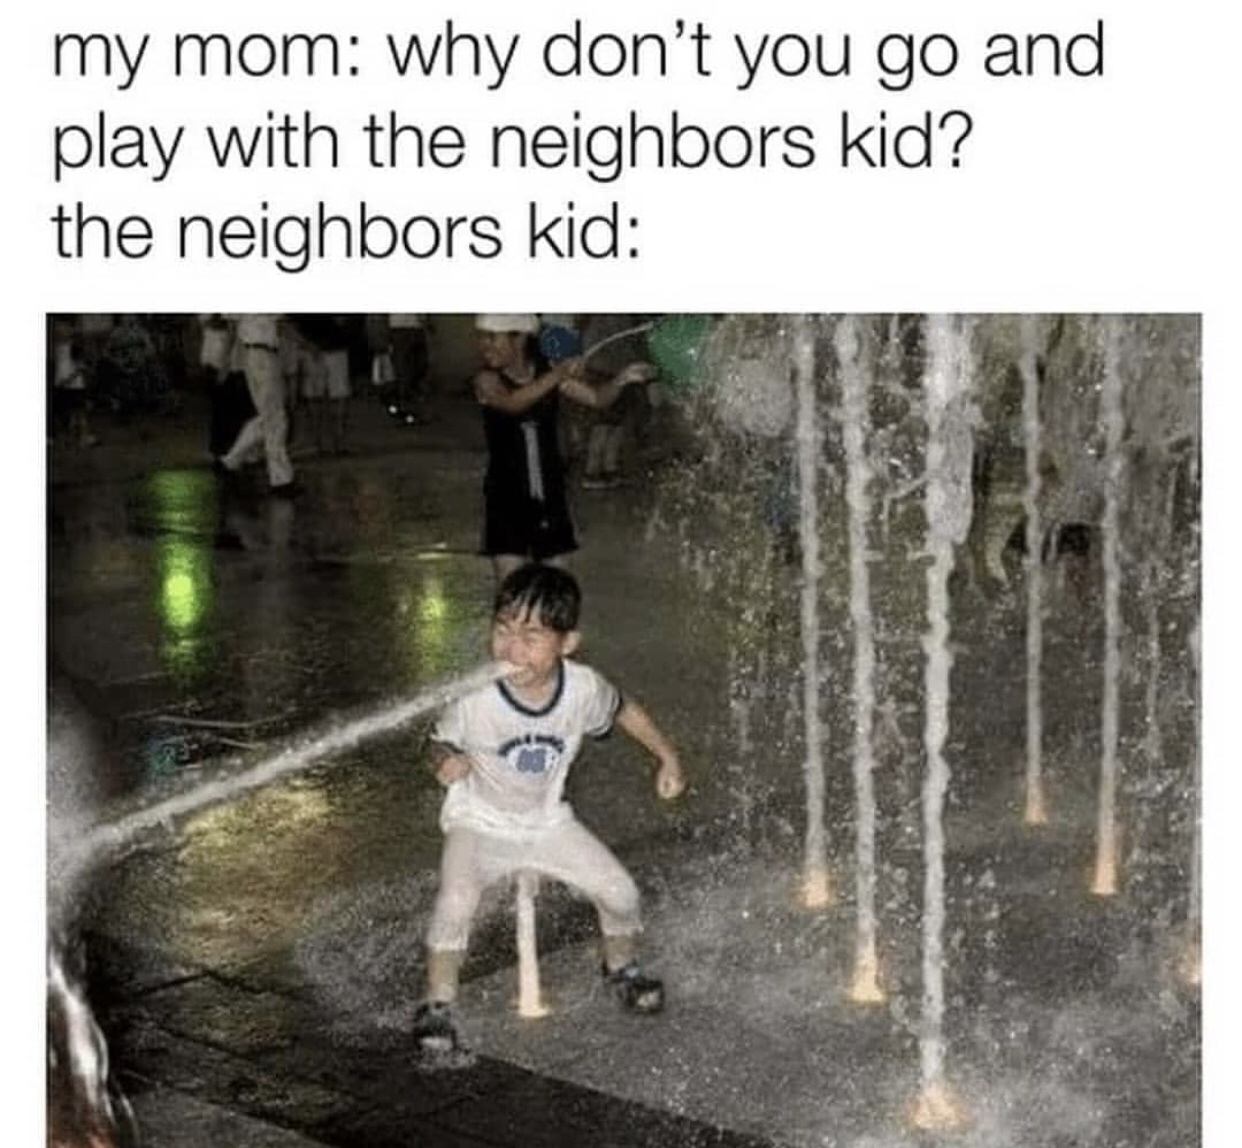 neighbors kid meme - my mom why don't you go and play with the neighbors kid? the neighbors kid